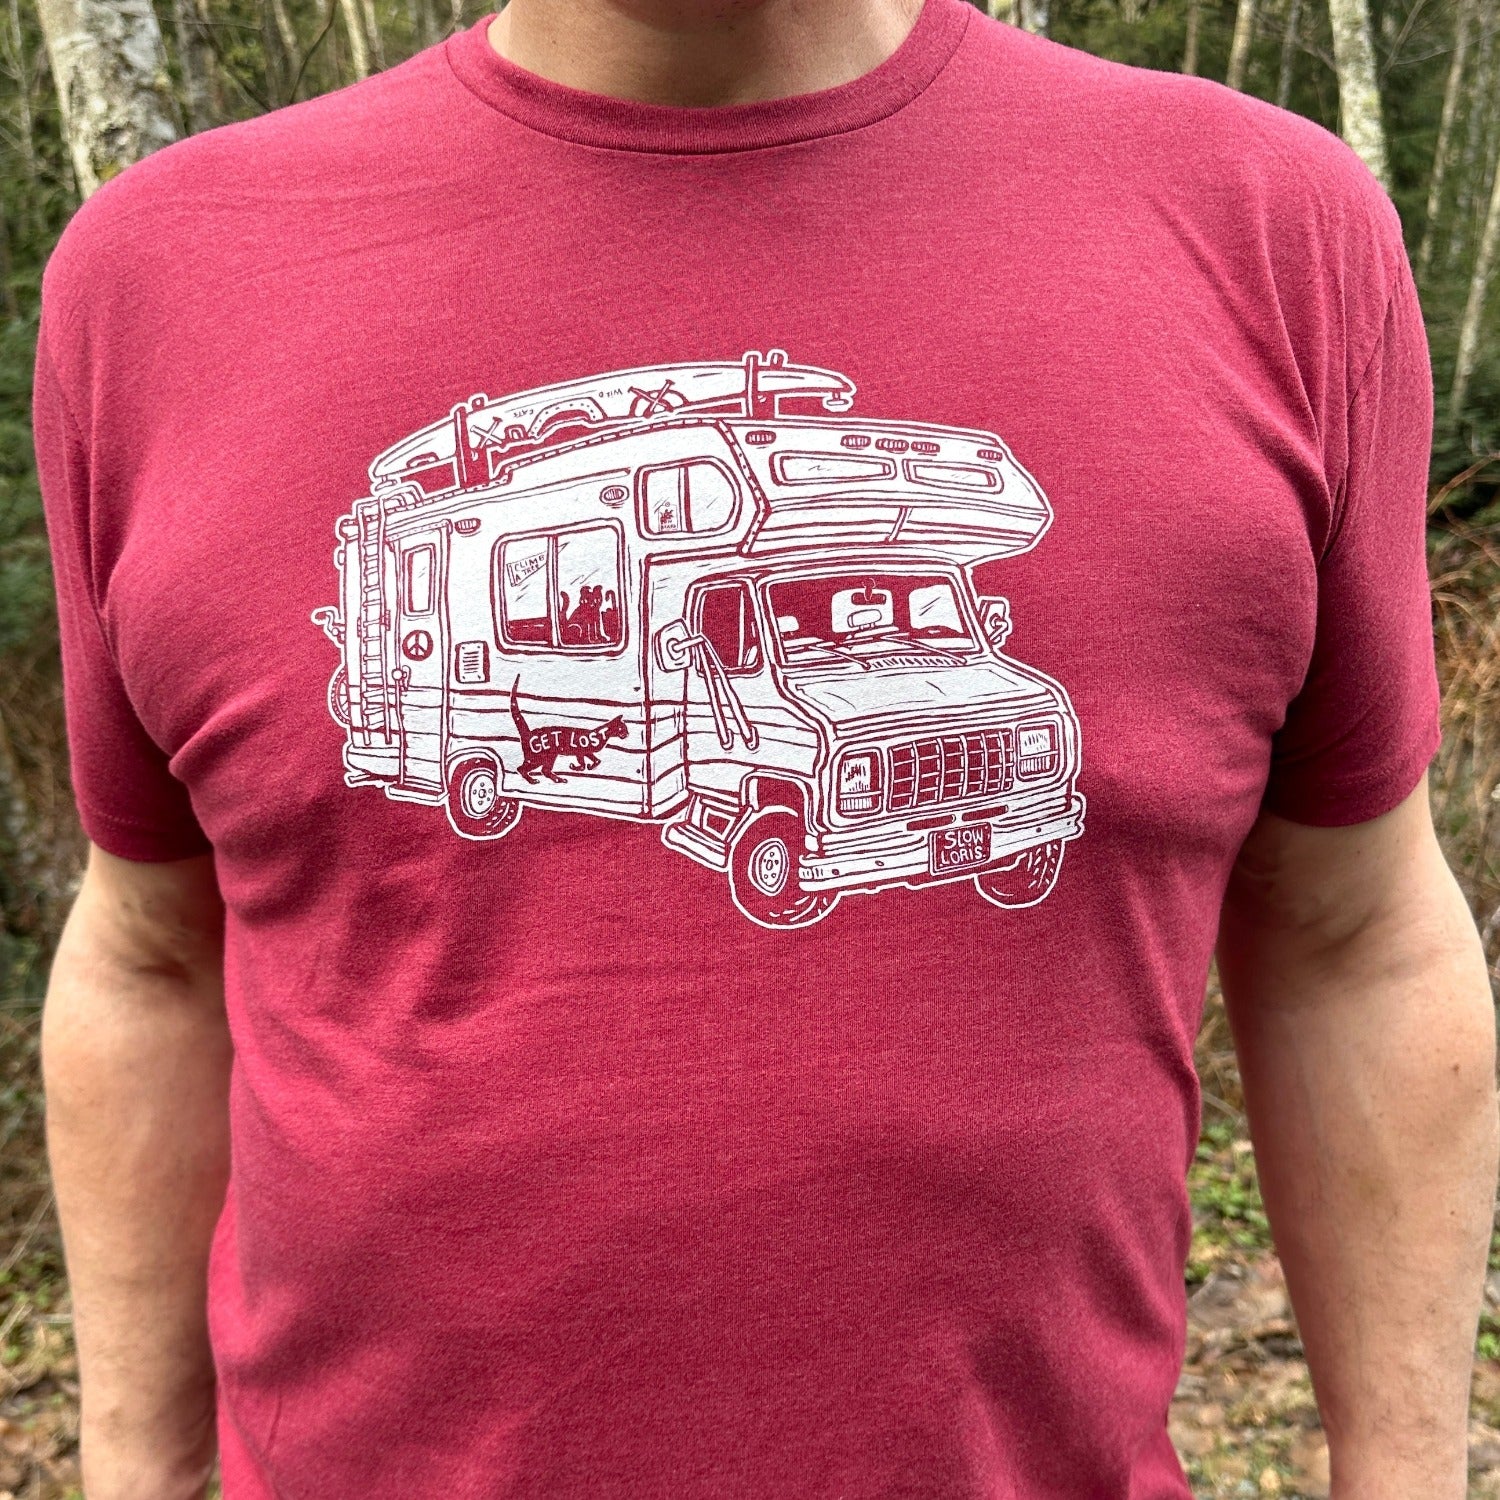 Man standing outside wearing a red shirt with a loaded up RV on it. .